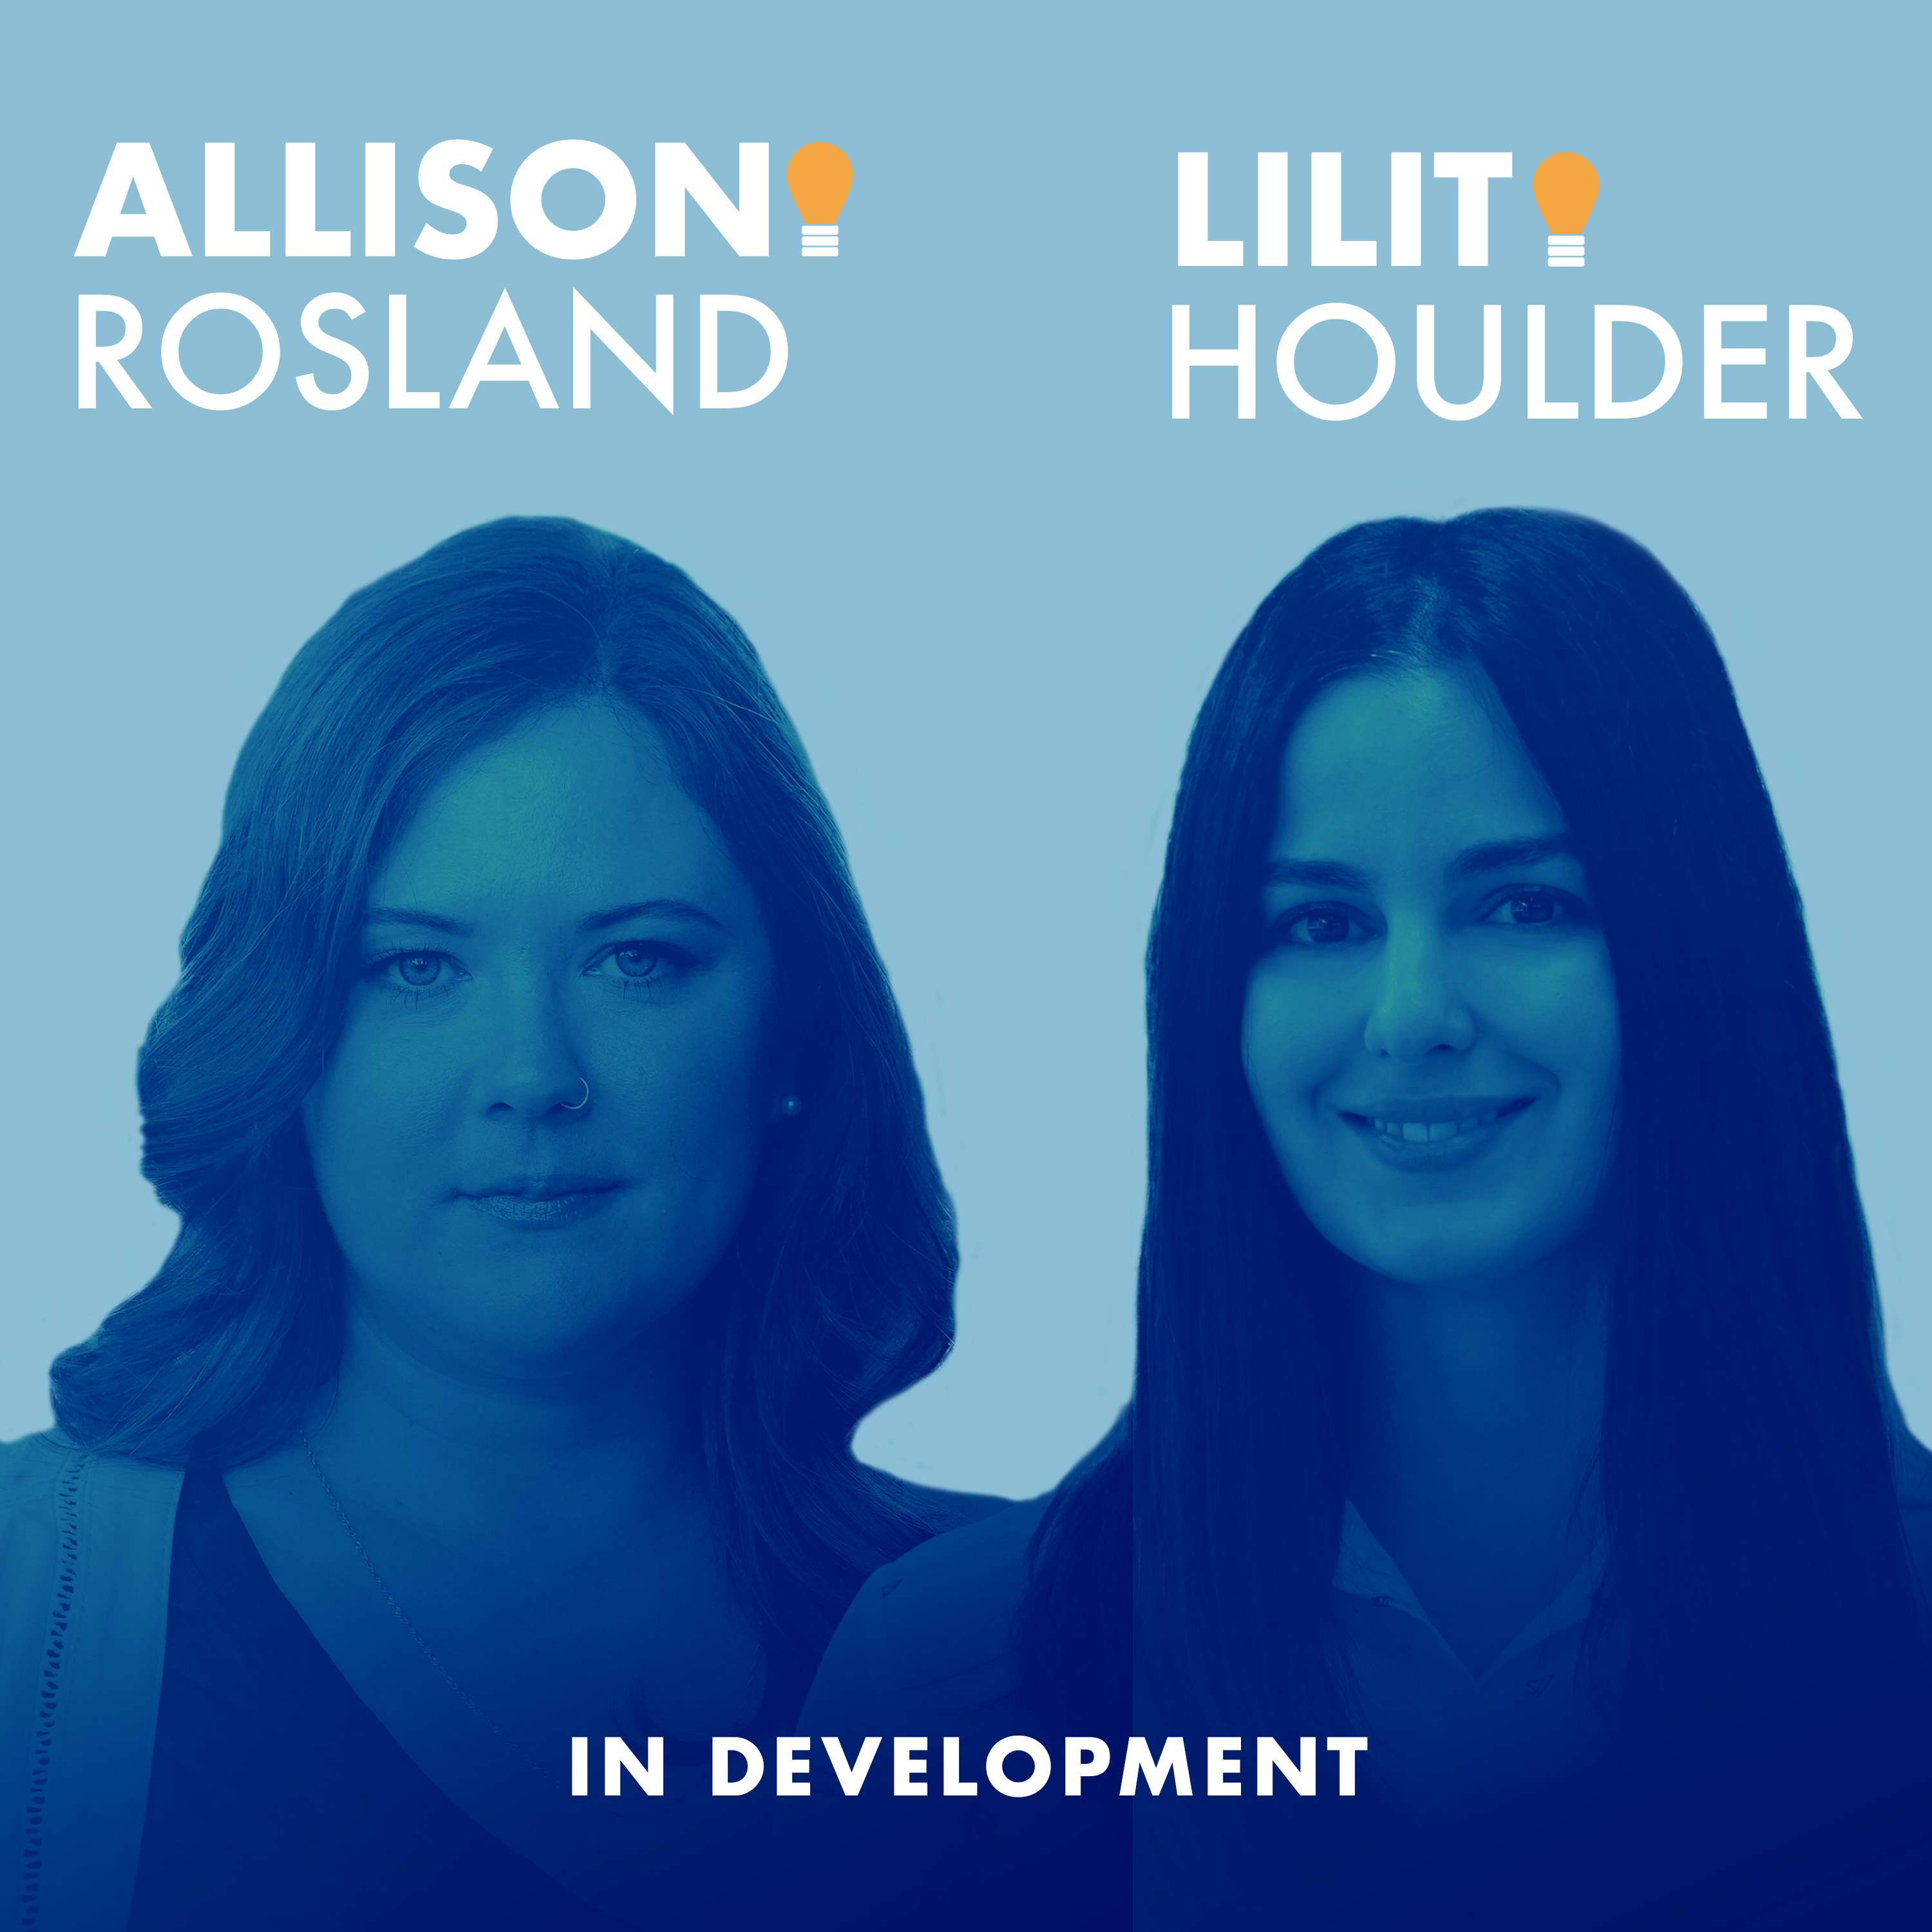 In Development Episode 40 - Back in Business! Featuring In Development's New Hosts, Lilit Houlder and Allison Rosland